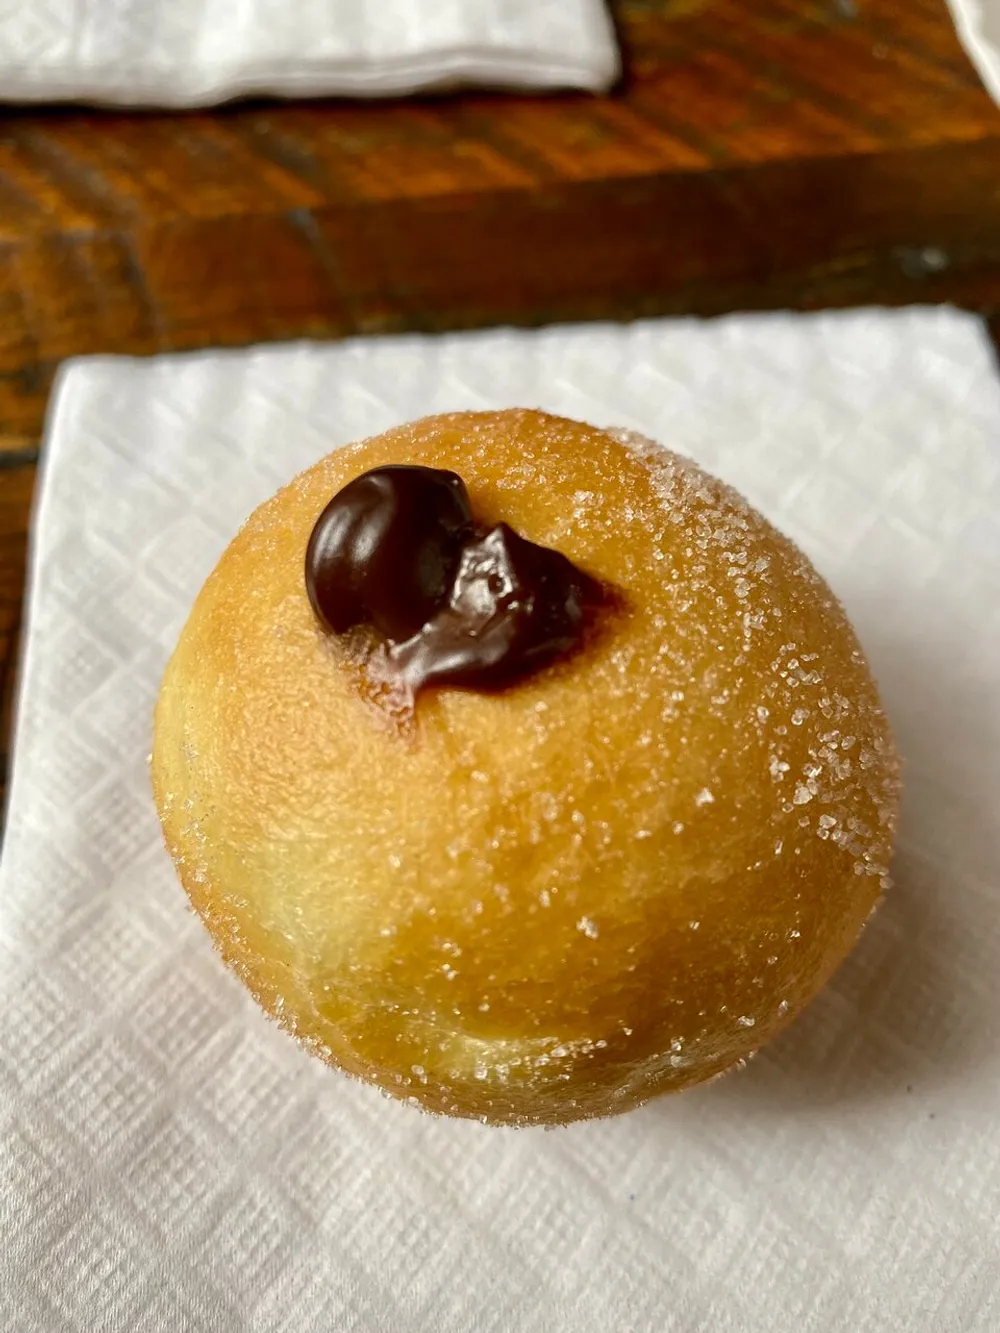 The image shows a single sugary doughnut with a chocolate drop on top resting on a white napkin with a wooden surface in the background